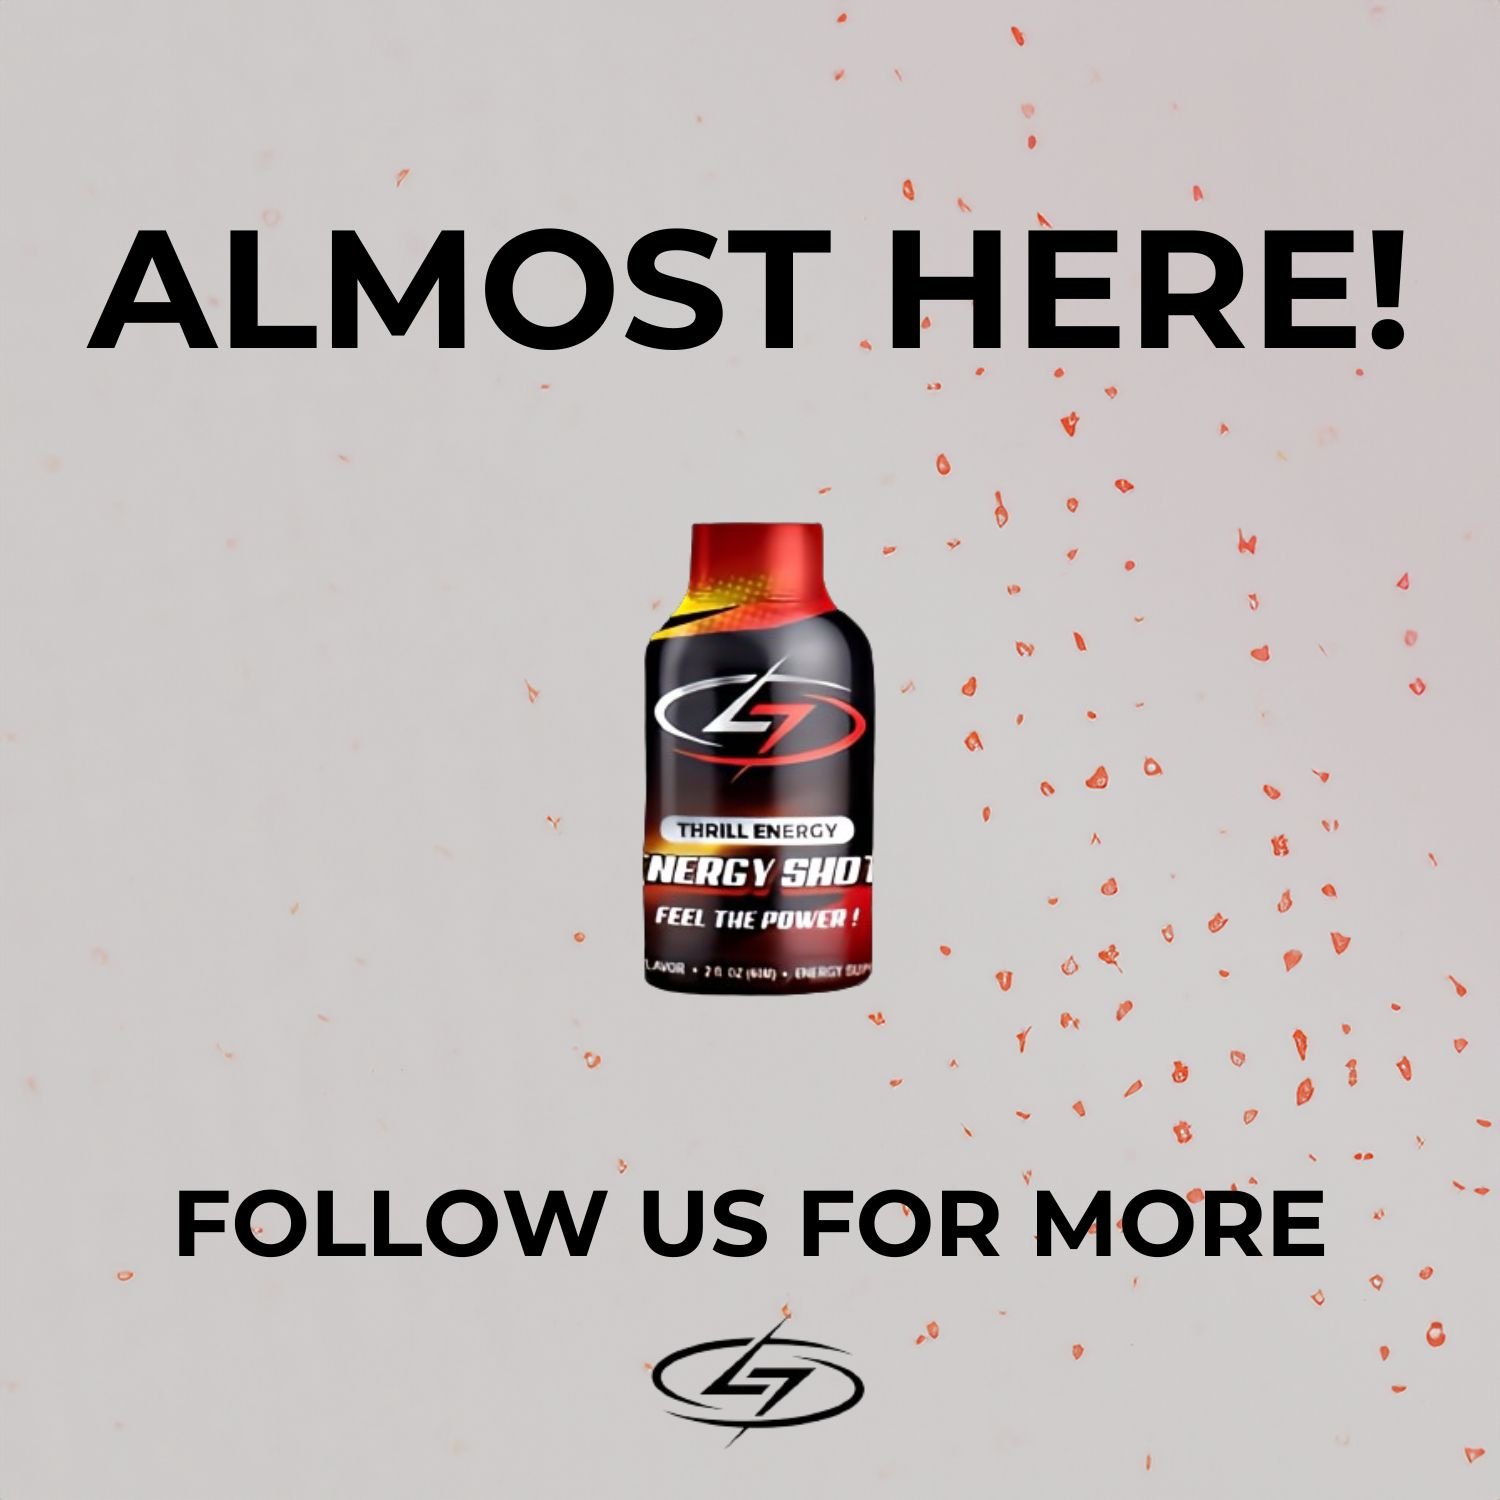 Want access to the hottest energy supplements before anyone else? Follow us now for exclusive sneak peeks at our latest creations! 🔥 Don't miss out on the thrill &ndash; hit that follow button and stay tuned for all the exciting updates coming your 